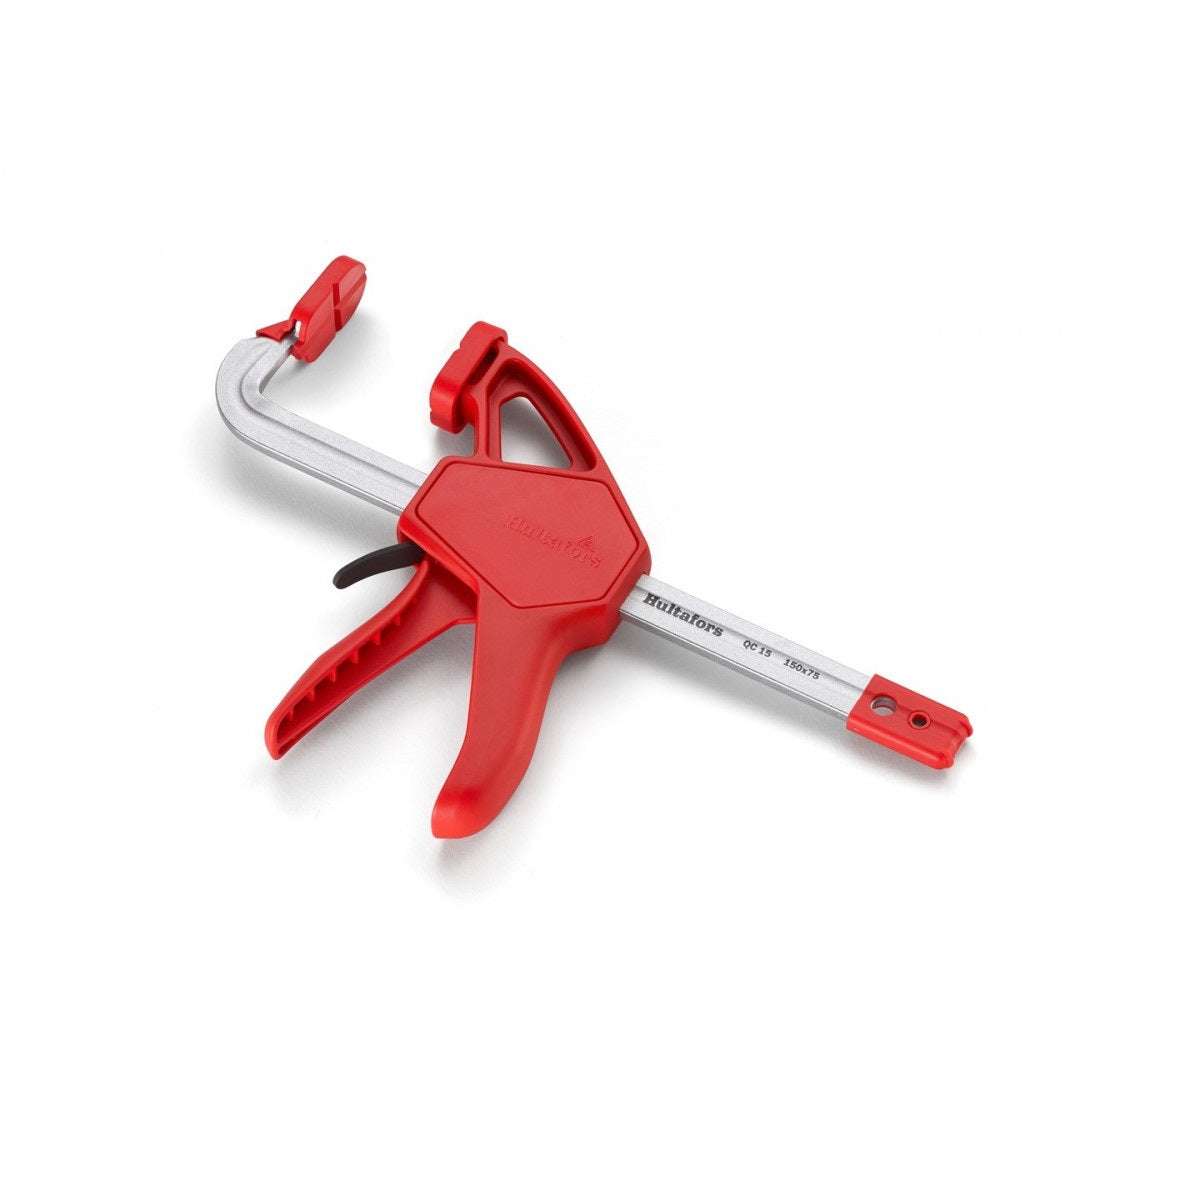 Compact Quick Clamp with clamping pressure up to 90 kg - Hultafors QC